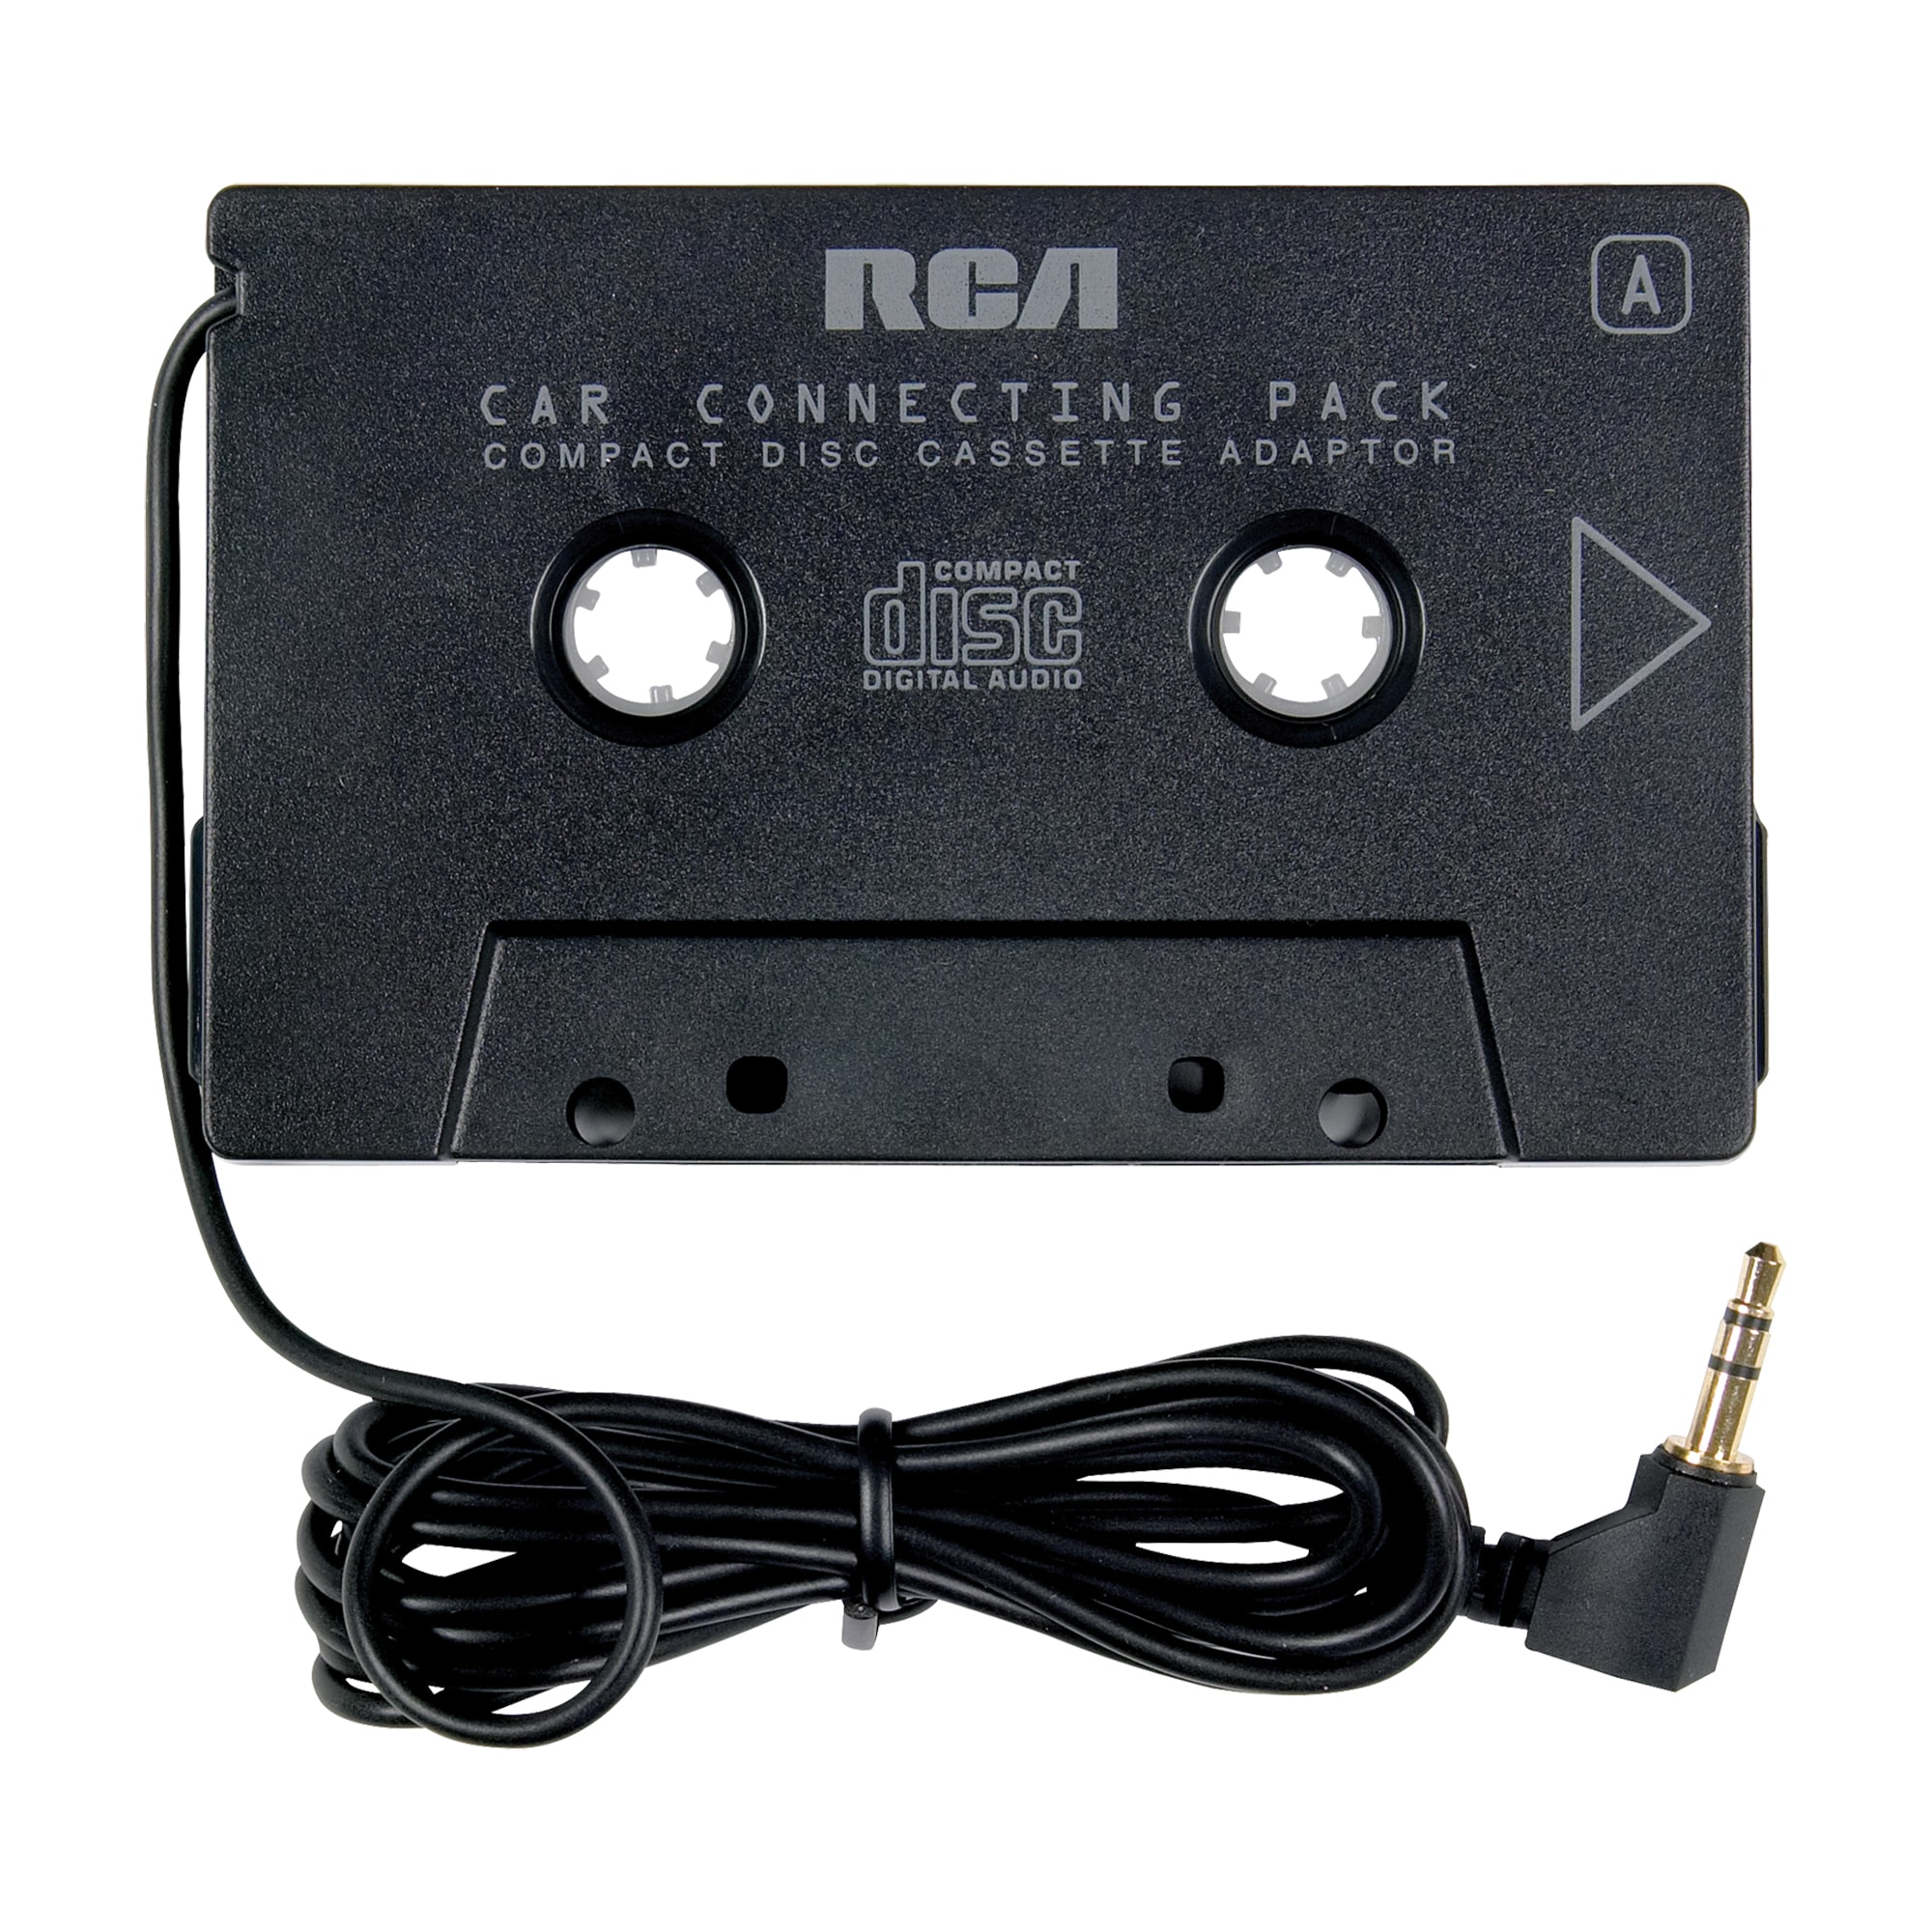 DIGITNOW Car Cassette Adapter to Play Smartphone Music Through Cassette  Deck, Cassette Adapter Plug & Play, with Auxiliary Calling  Microphone-Cassette adapter-DIGITNOW!